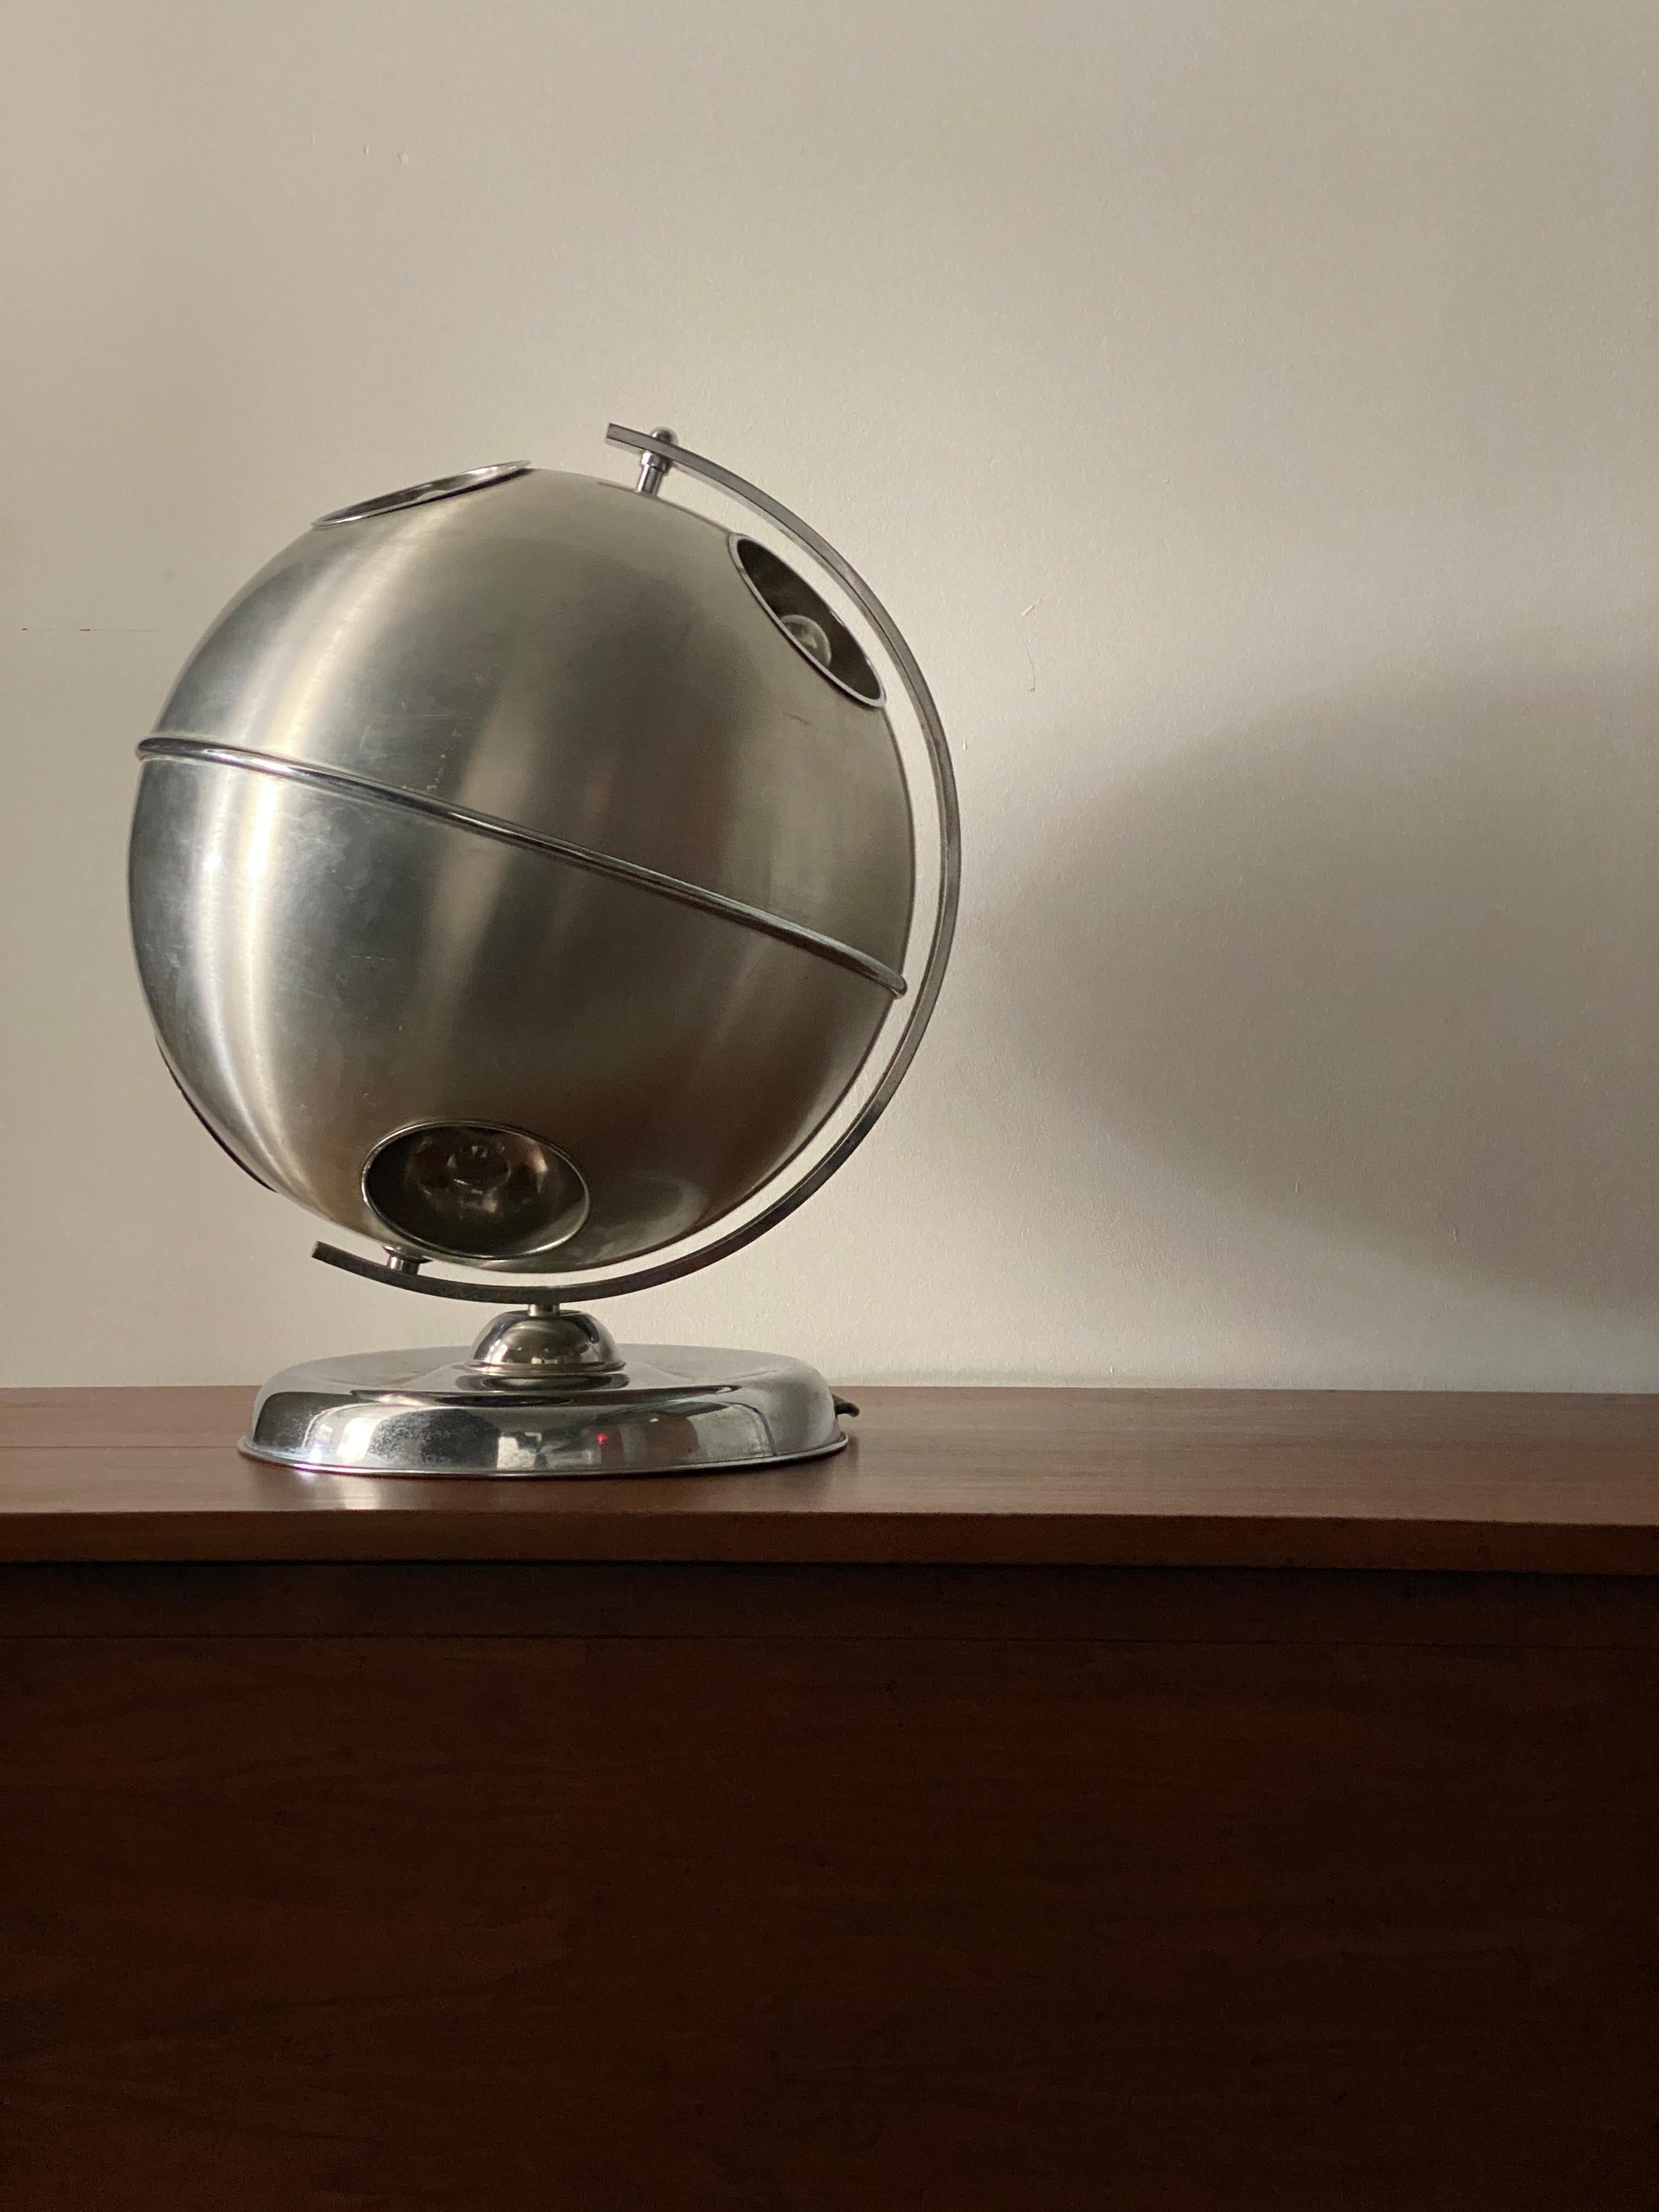 An adjustable table lamp designed by an unknown Italian designer. Produced in Italy, 1950s. Other Italian lighting designers include Max Ingrand, Angelo Lelii, Gino Sarfatti, and Achille Castiglioni.

Keywords: Spherical, sphere, globe, space age.